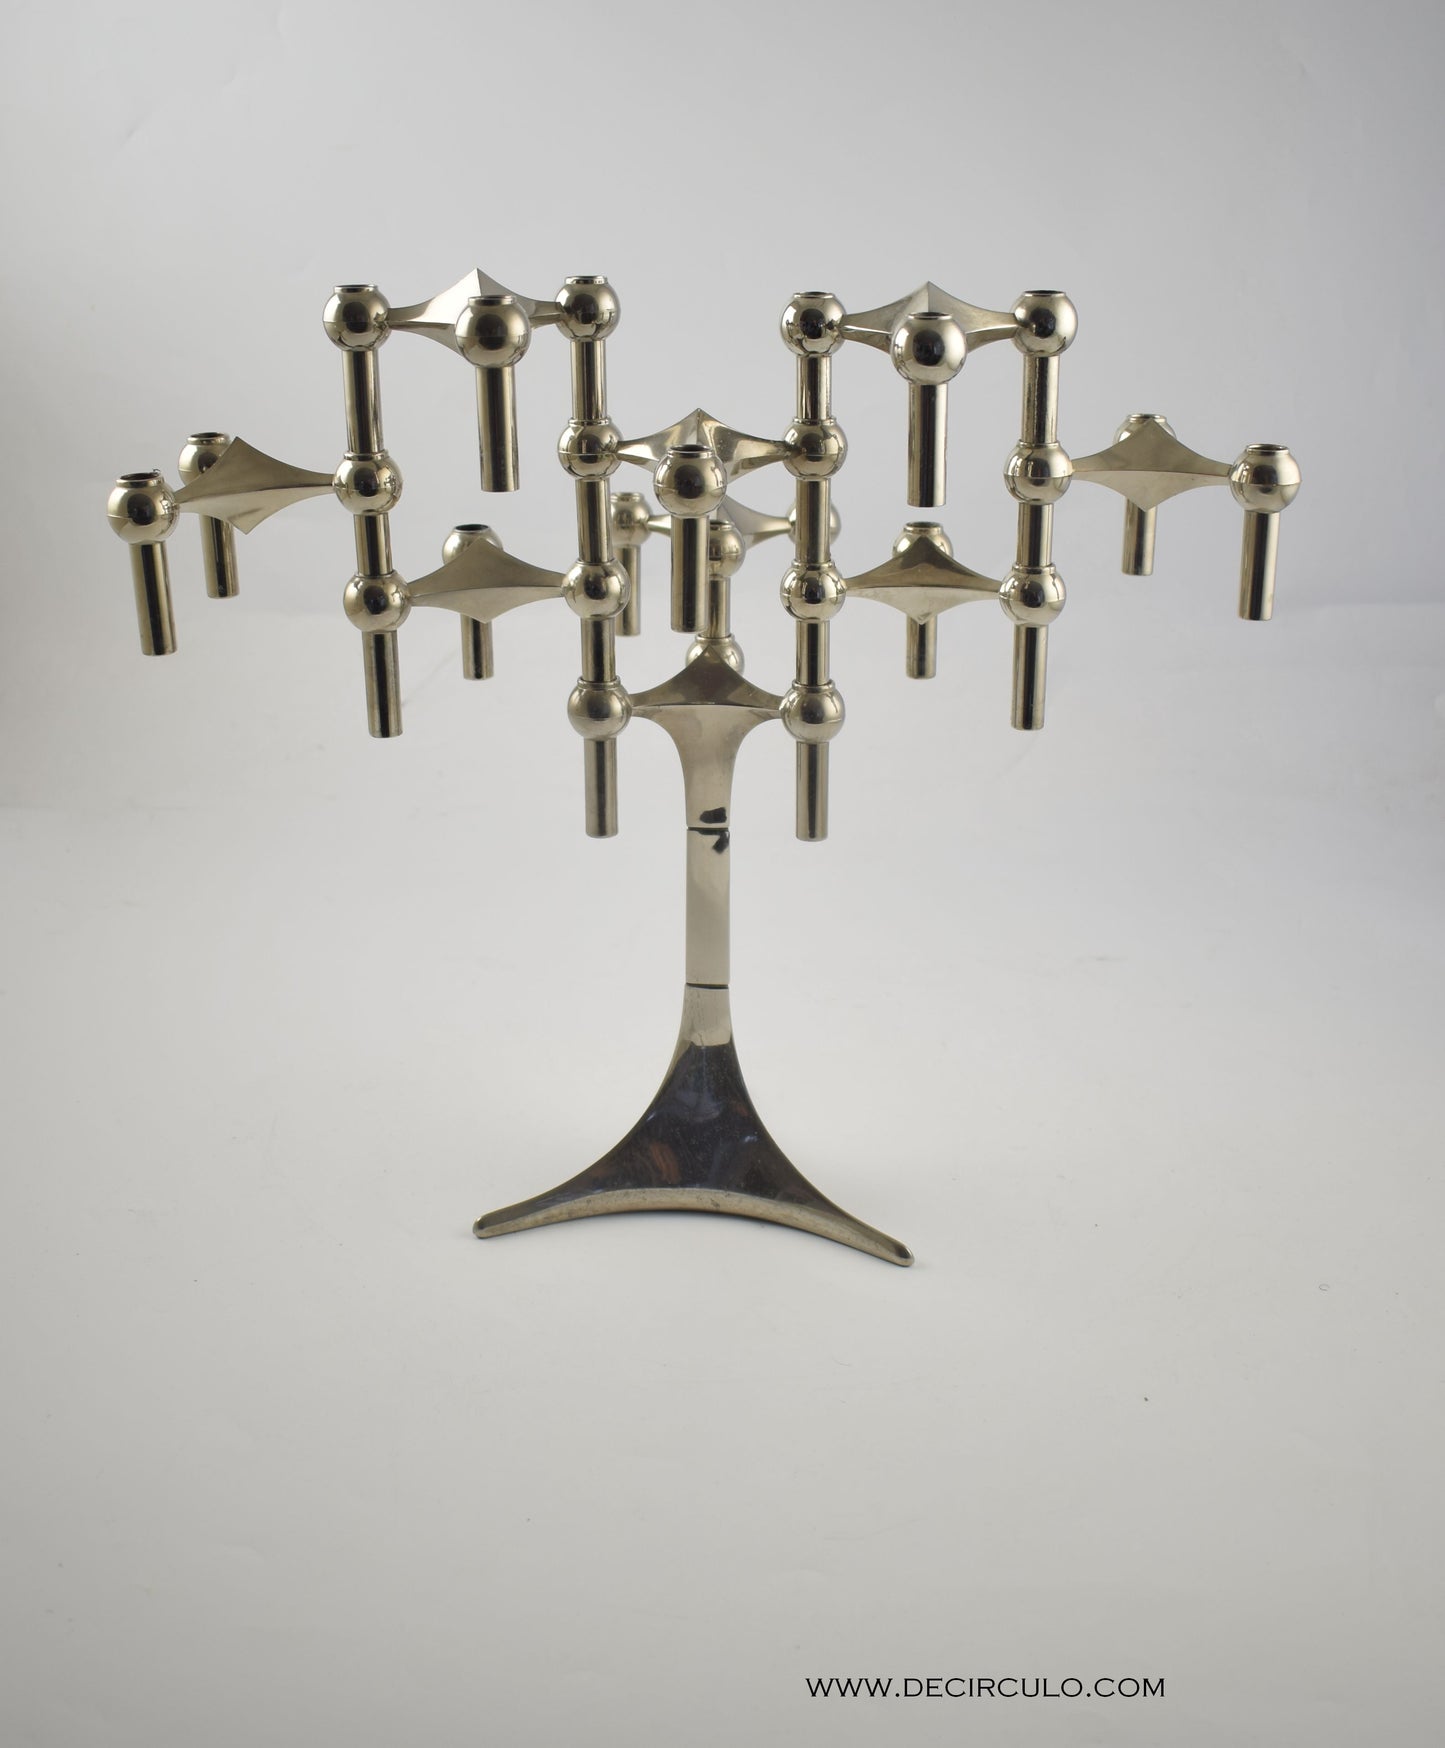 rare base Nagel Candle holders S22 designed by Ceasar Stoffi and Fritz Nagel and manufactured by BMF